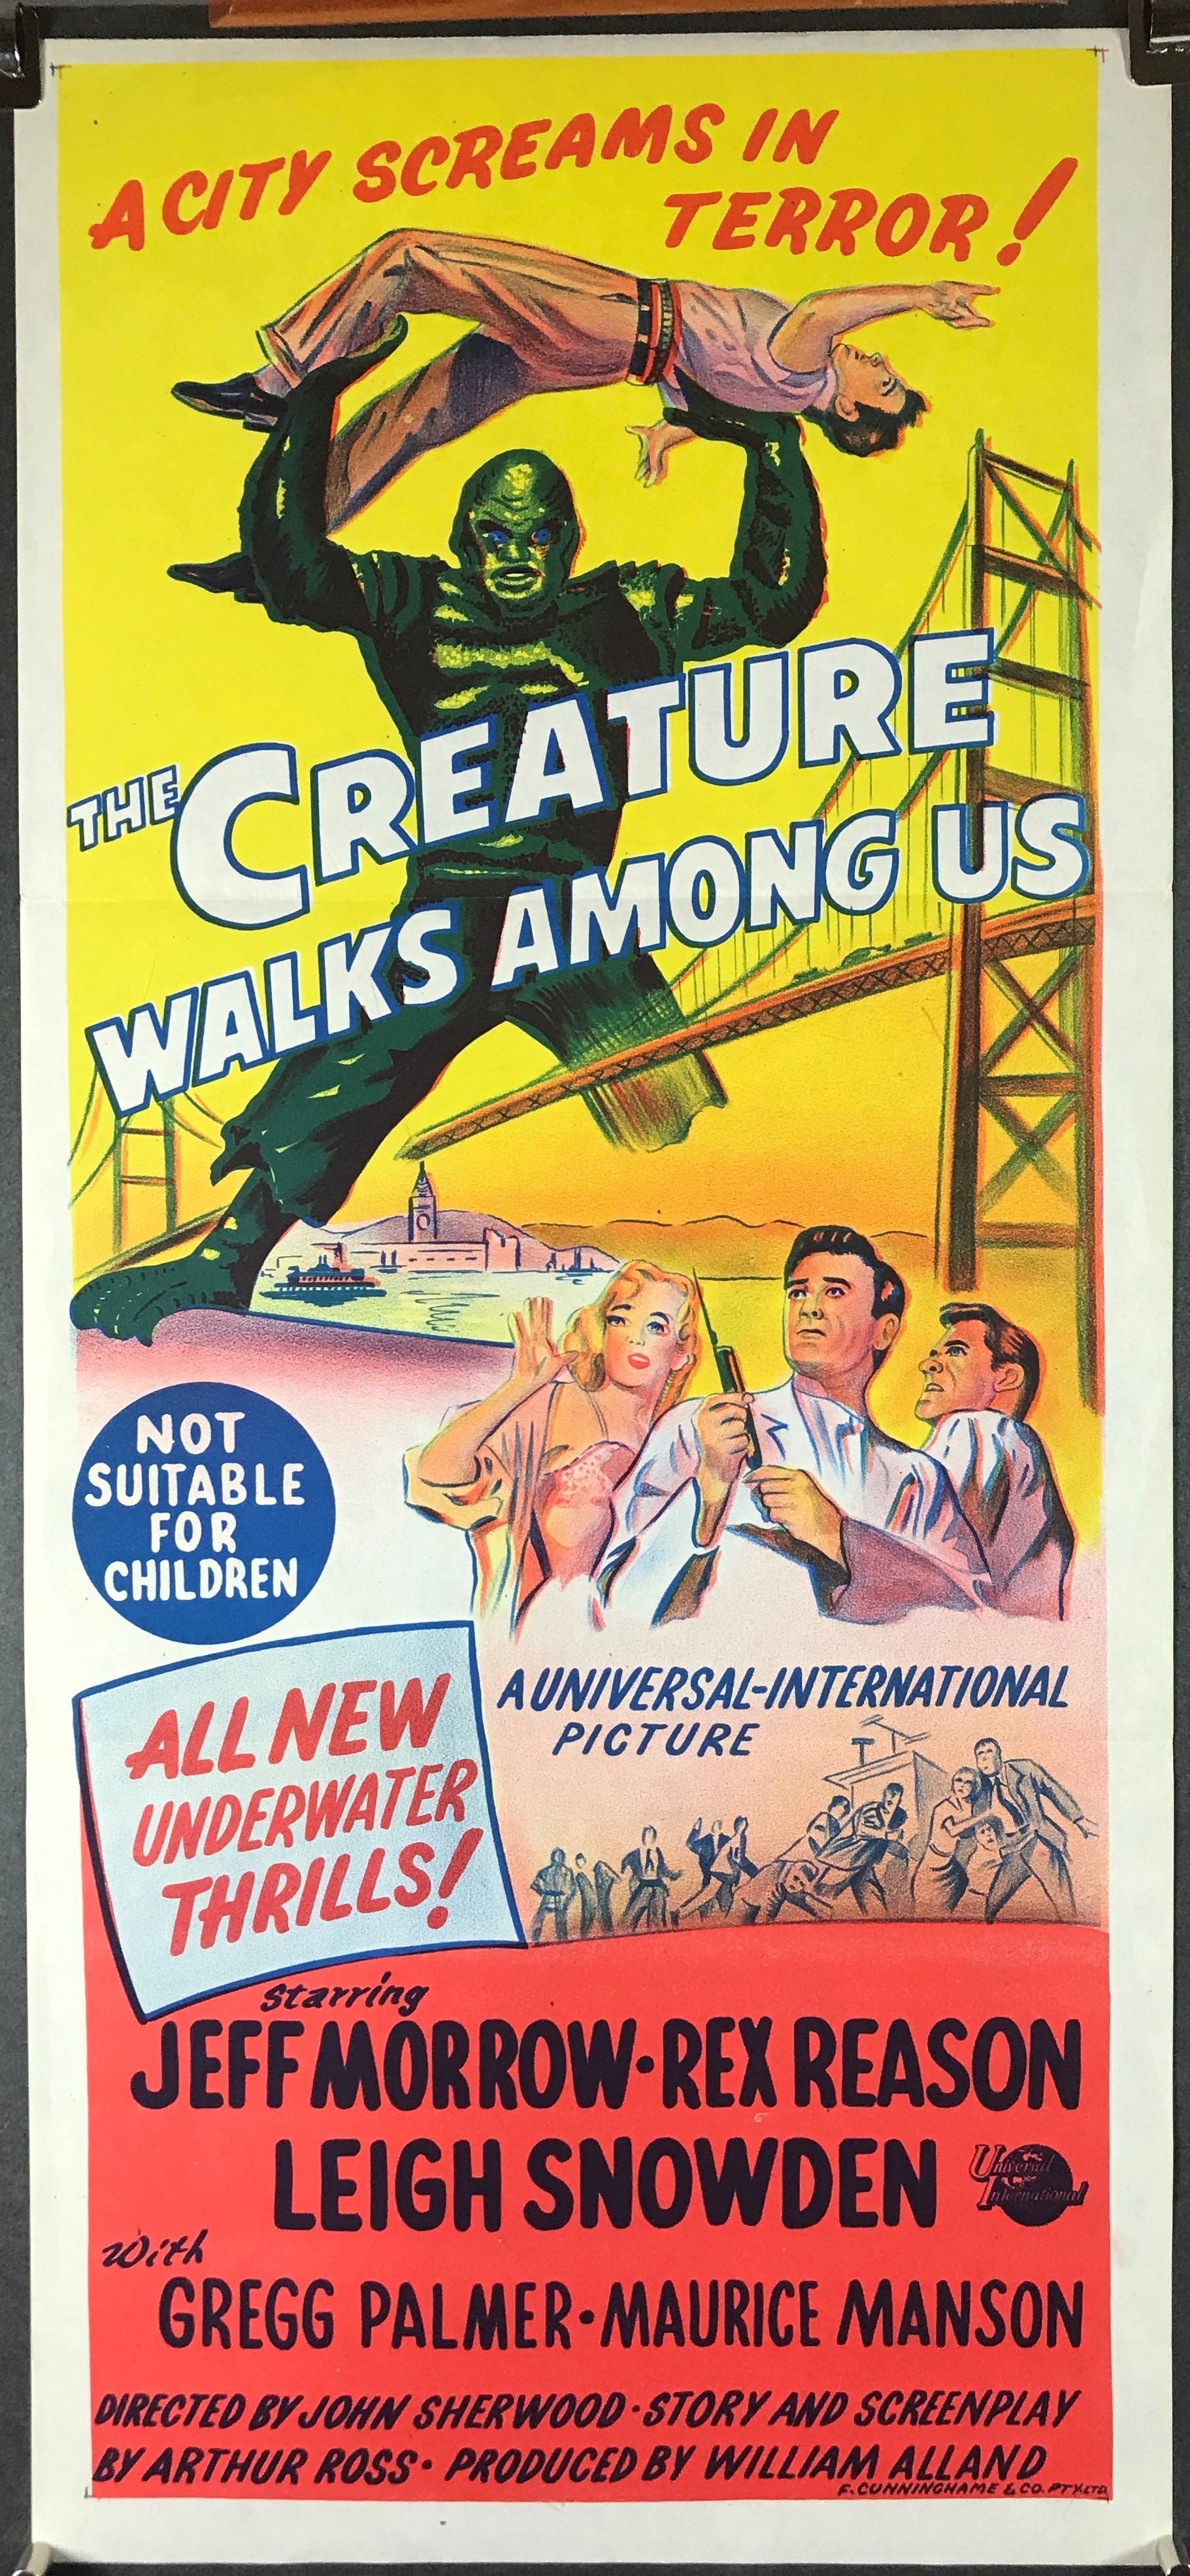 1956 THE CREATURE WALKS AMONG US VINTAGE MOVIE POSTER PRINT STYLE B 24x16 9MIL 